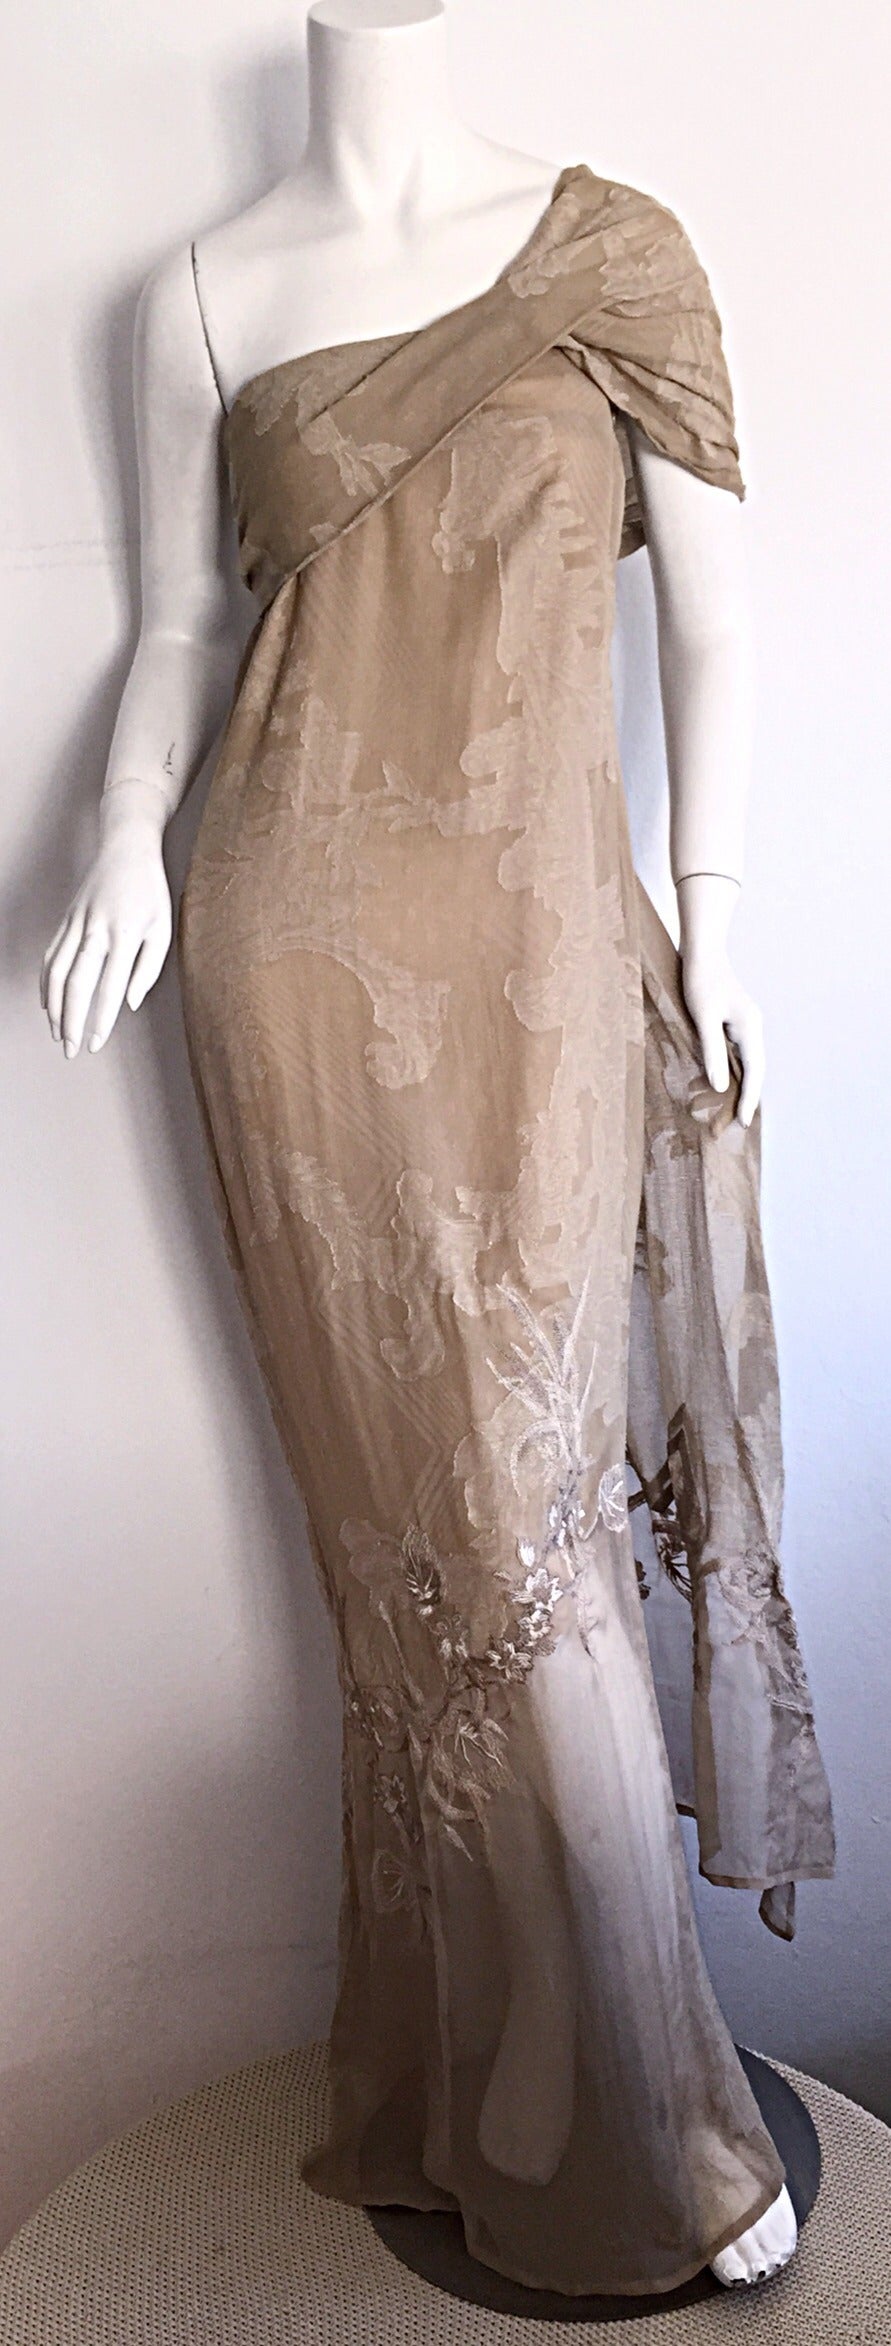 Exquisite vintage Gianfranco Ferre Grecian Goddess gown!!! Tan/khaki color , with intricate silk and lace details throughout. Dress can be worn a number of ways. Spaghetti straps tucked in, one spaghetti strap tucked in, both spaghetti strap